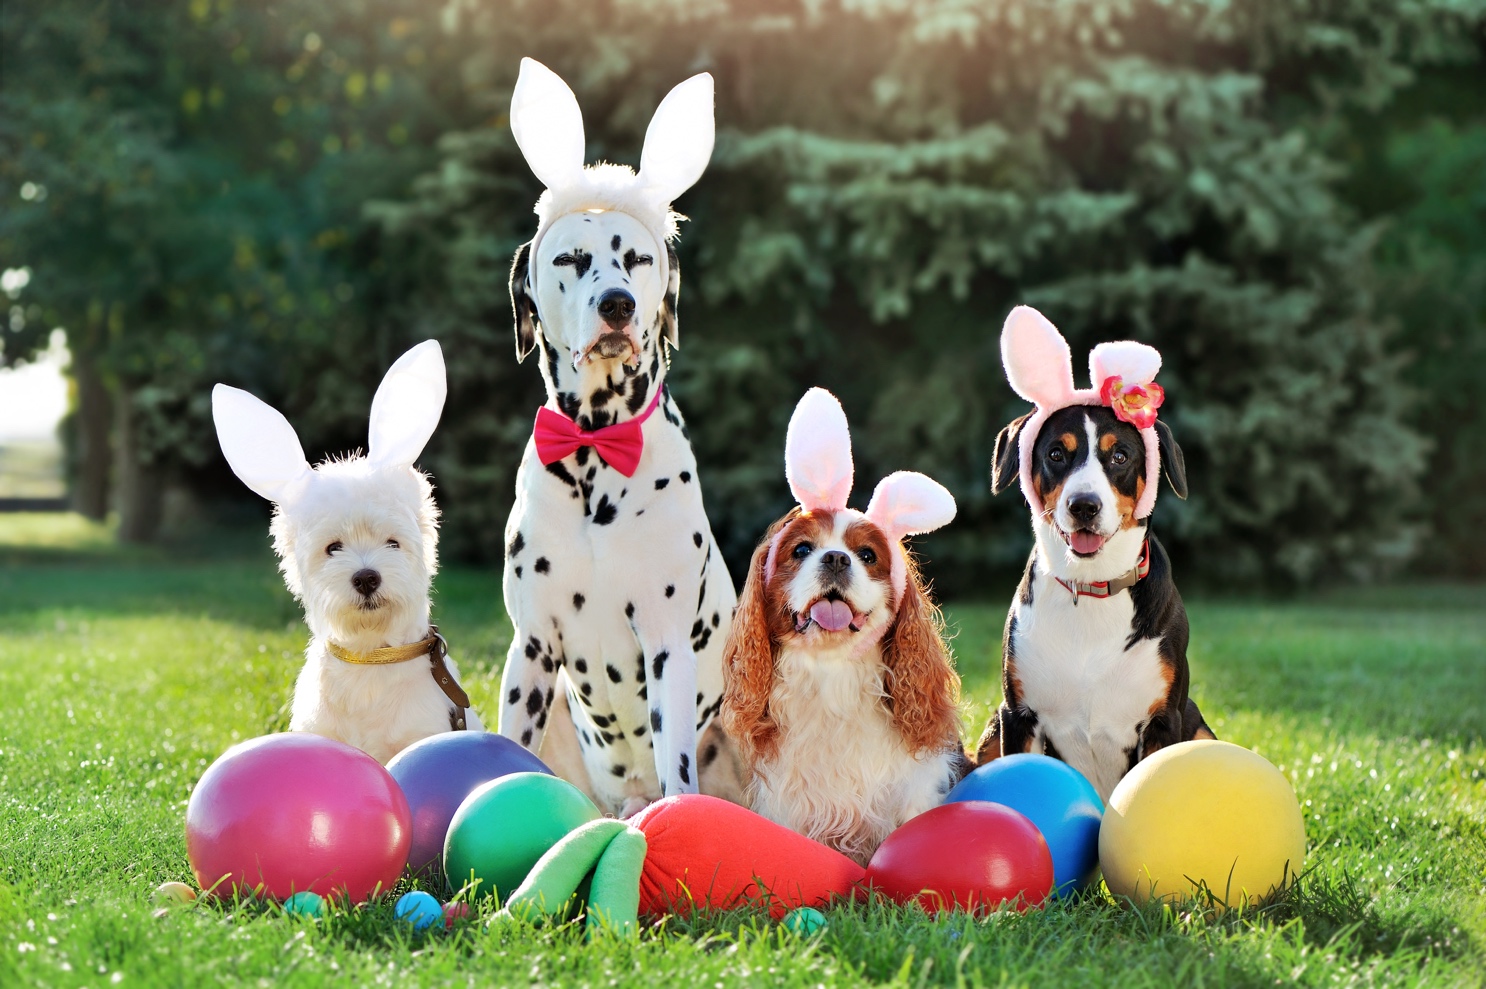 Visit the Easter Bunny at Three Dog Bakery